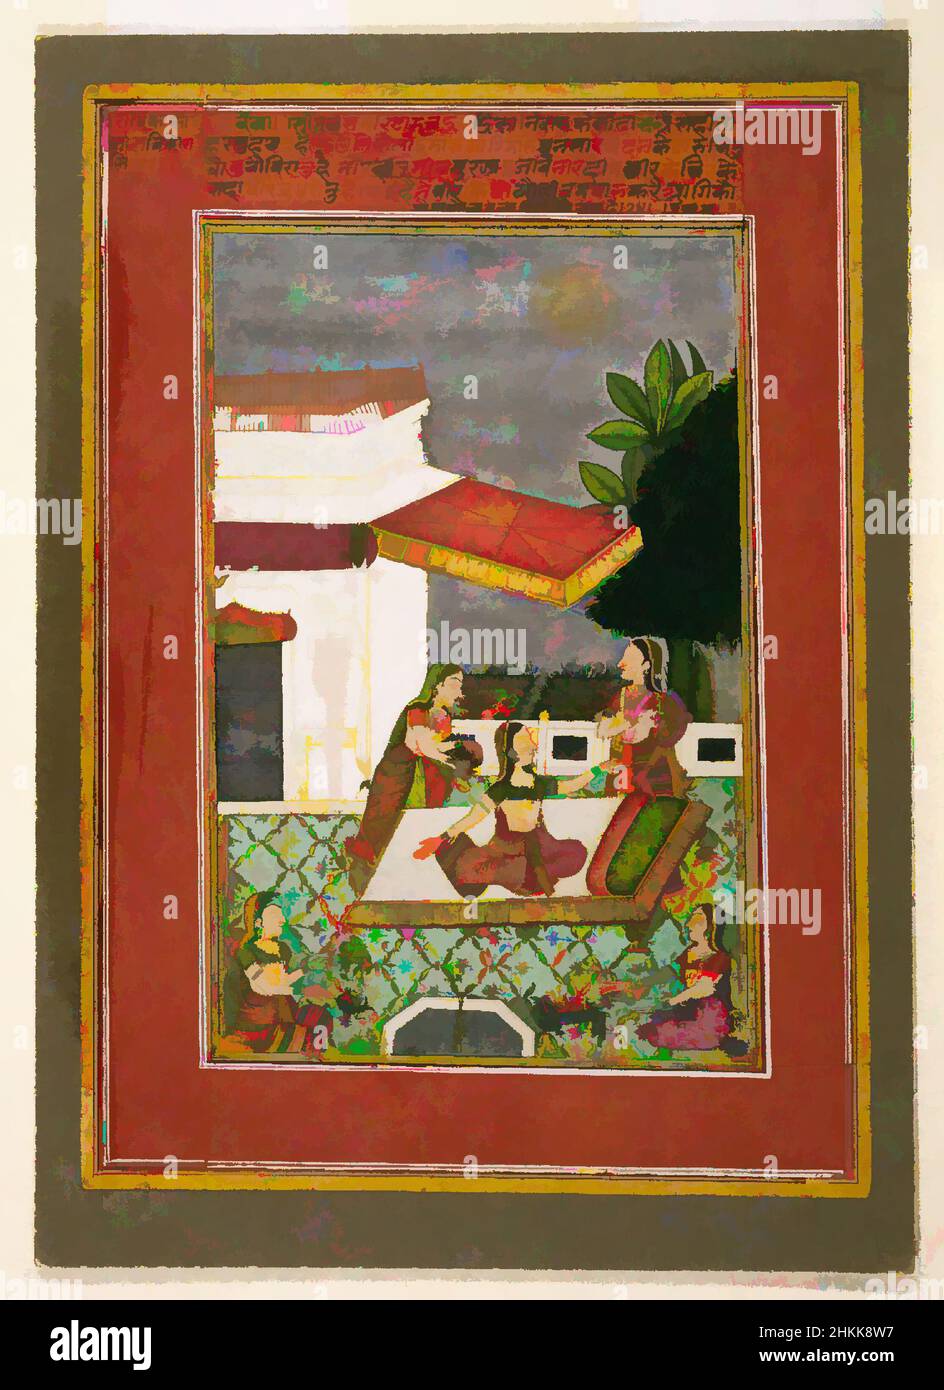 Art inspired by Radha manifesting the effect of love's separation from Krishna, page from a Rasikapriya series of Keshavadasa, Kasam Ahmad, Opaque watercolor, gold, and silver on paper, Rajasthan, India, 1749, sheet: 10 1/4 x 7 5/16 in., 26.0 x 18.6 cm, Asian, Bikaner, Chauguno, gold, Classic works modernized by Artotop with a splash of modernity. Shapes, color and value, eye-catching visual impact on art. Emotions through freedom of artworks in a contemporary way. A timeless message pursuing a wildly creative new direction. Artists turning to the digital medium and creating the Artotop NFT Stock Photo